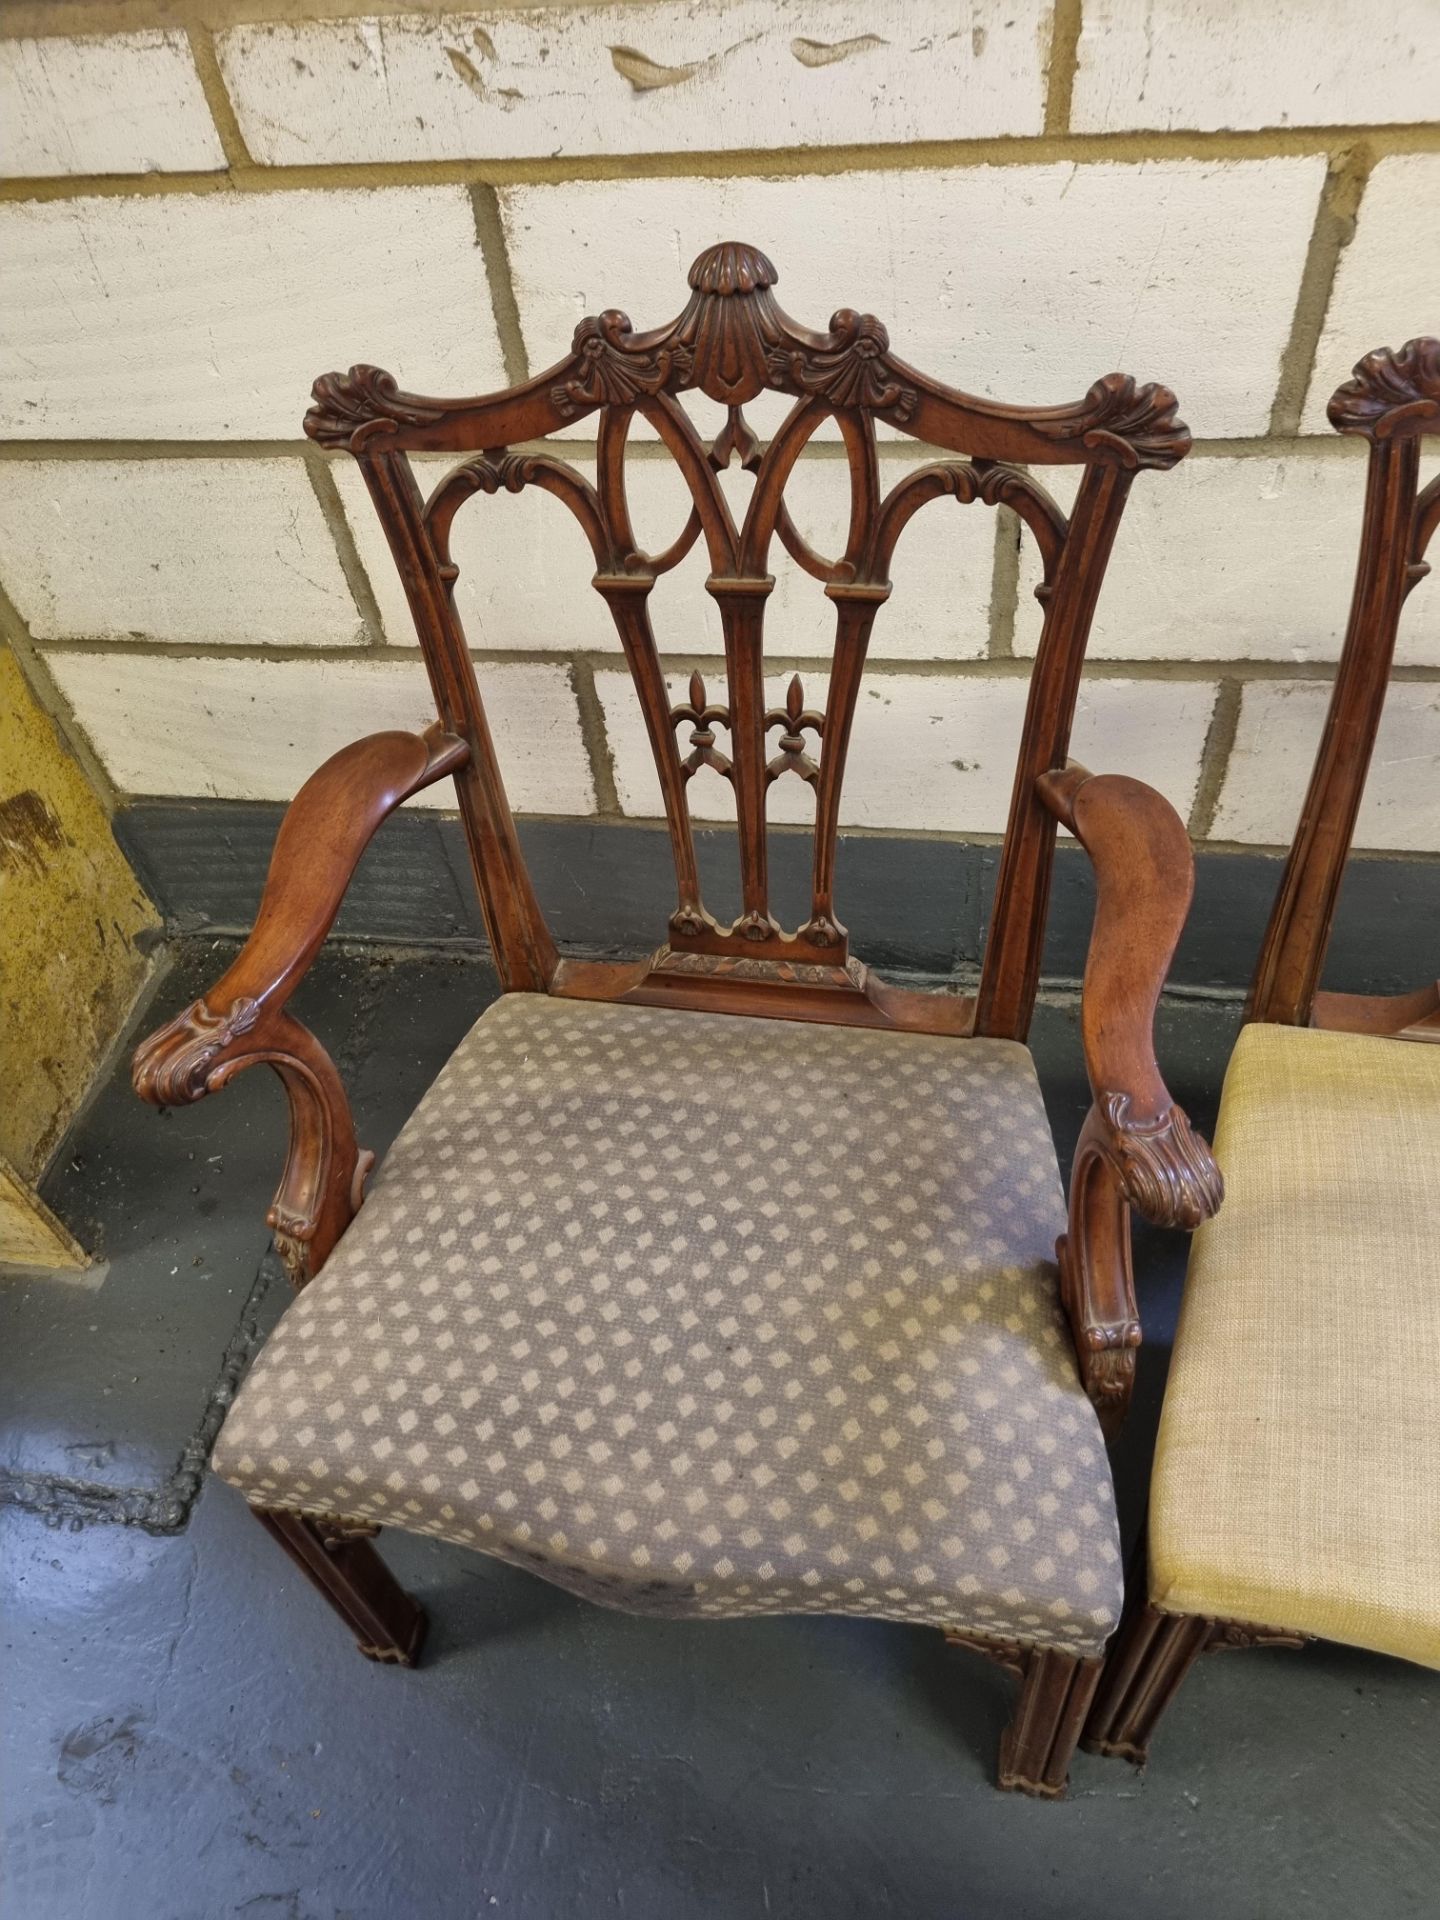 3 X Arthur Brett Mahogany Upholstered Dining Chairs With Great Carving Detail To Back And Legs; - Image 5 of 5